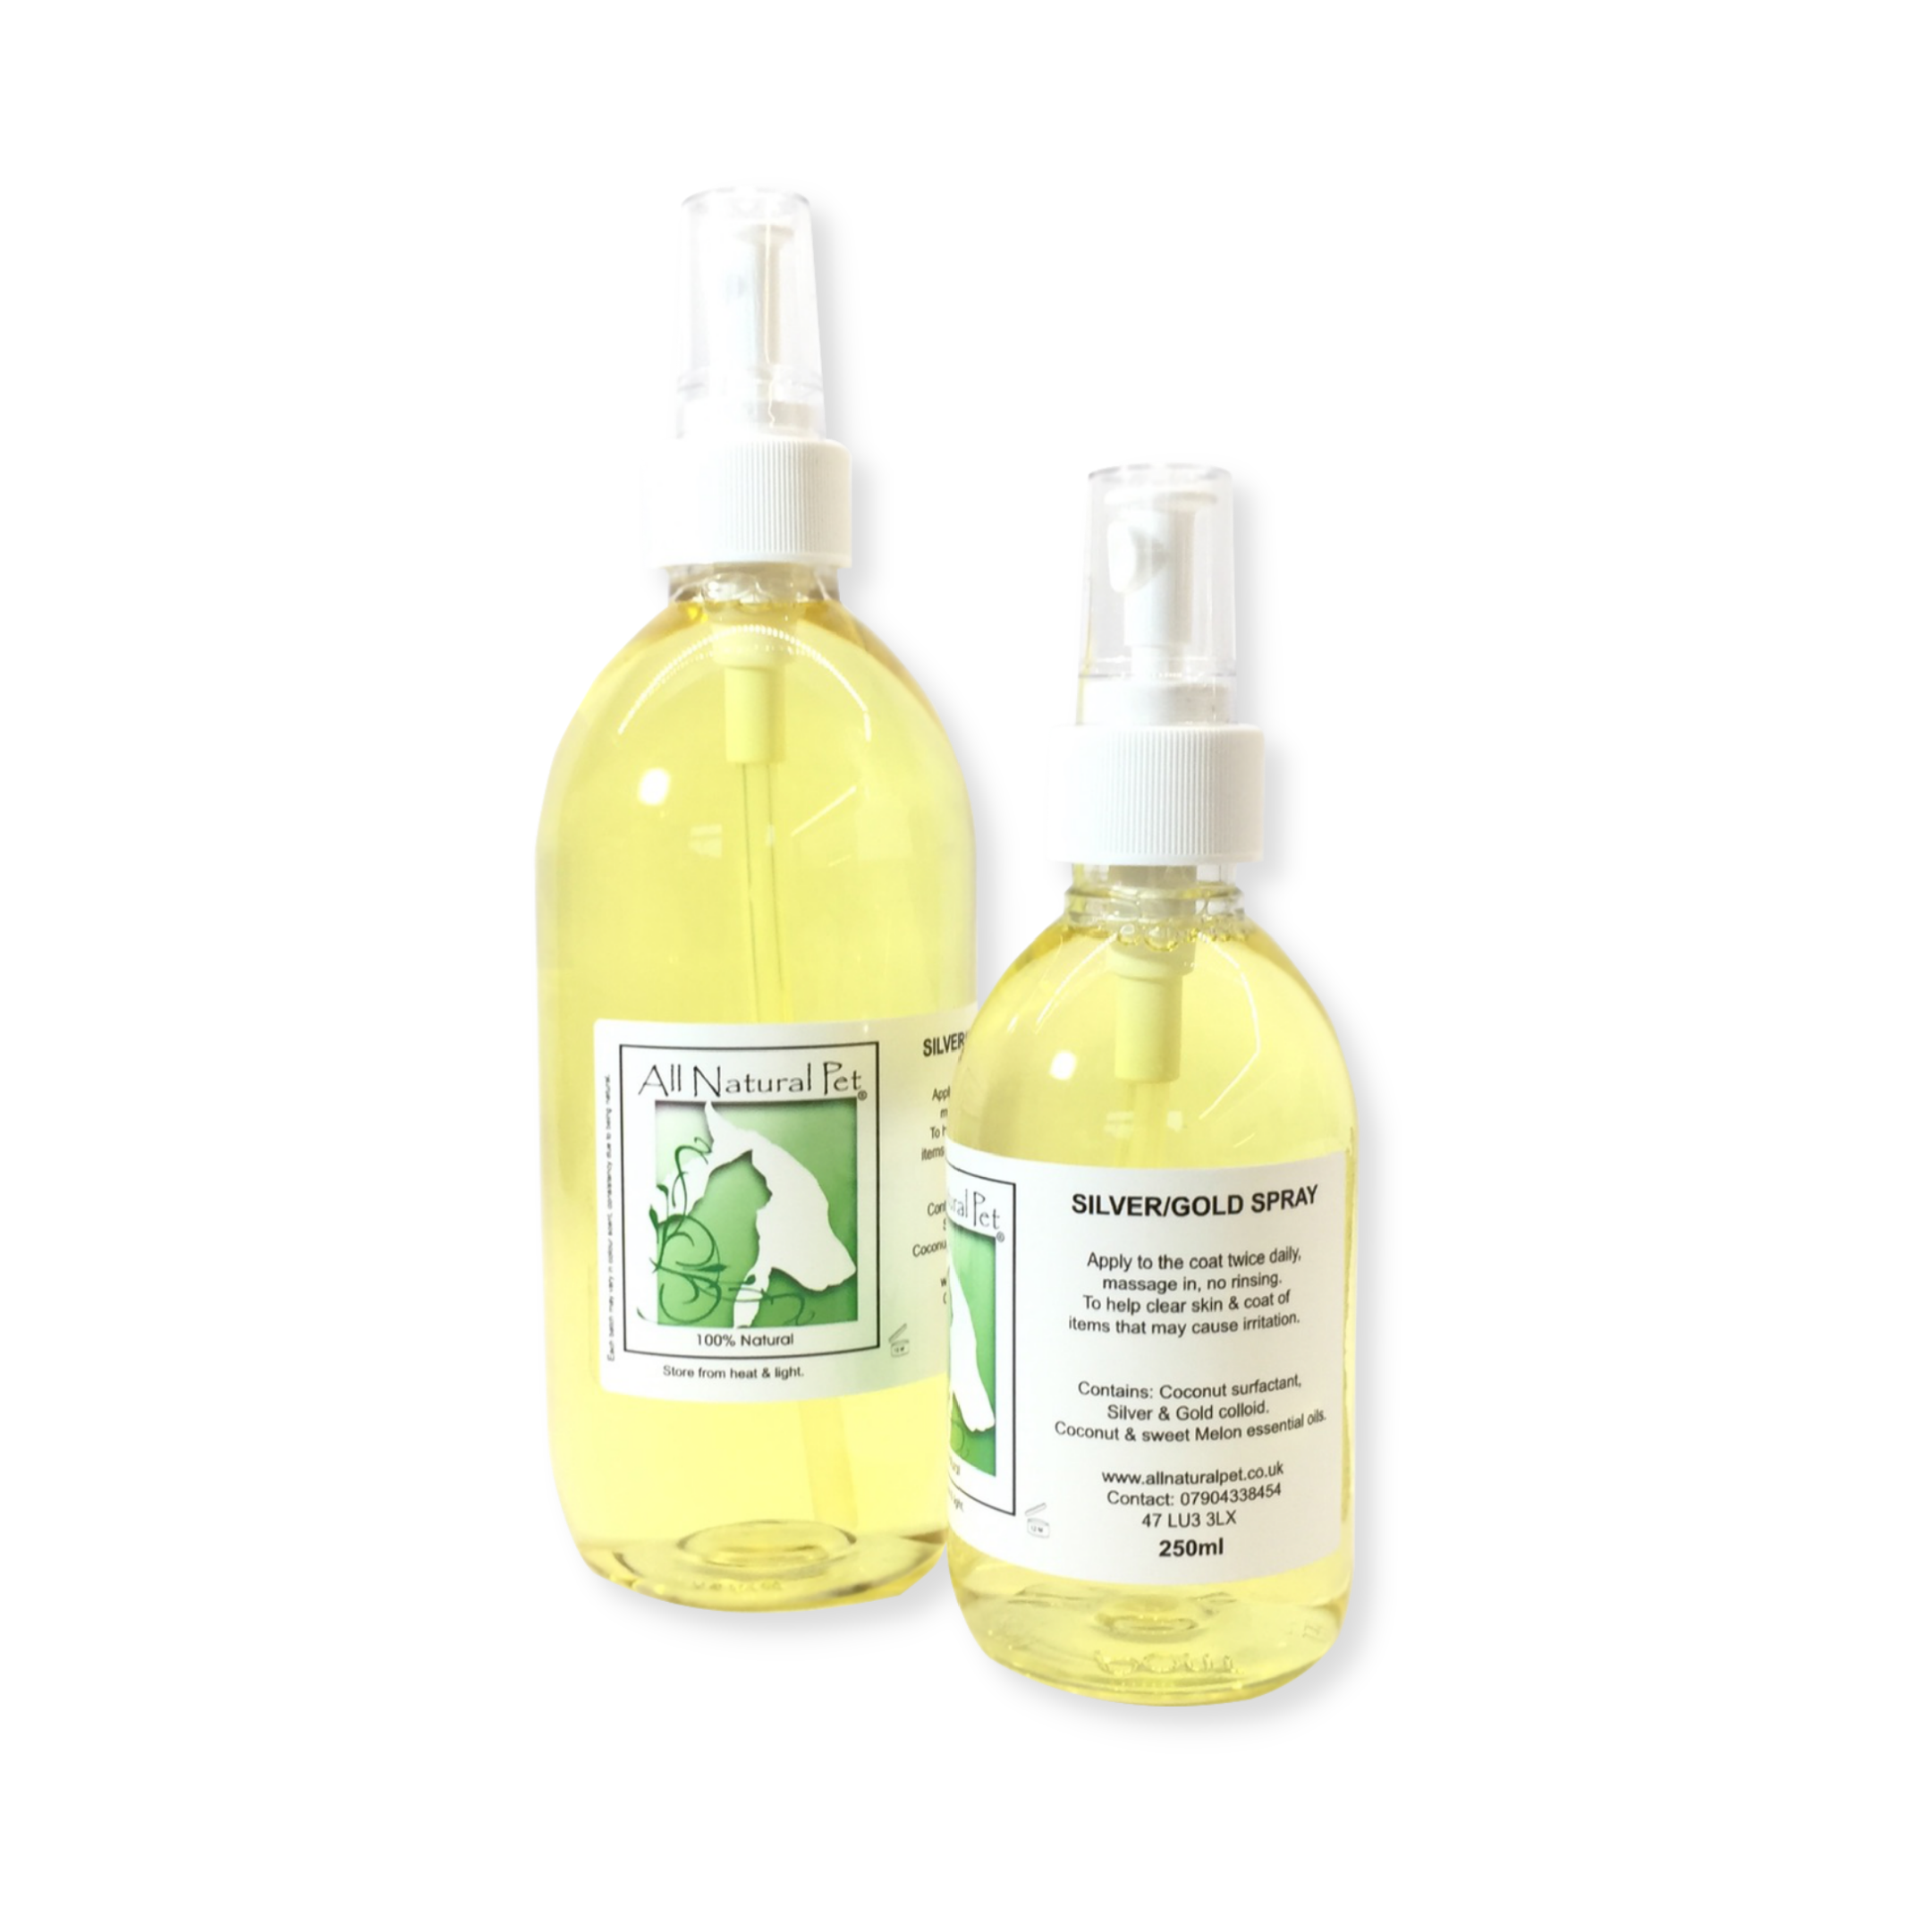 A clear bottle with a white spray lid containing a nicely scented golden coloured natural spray for pets with allergy's